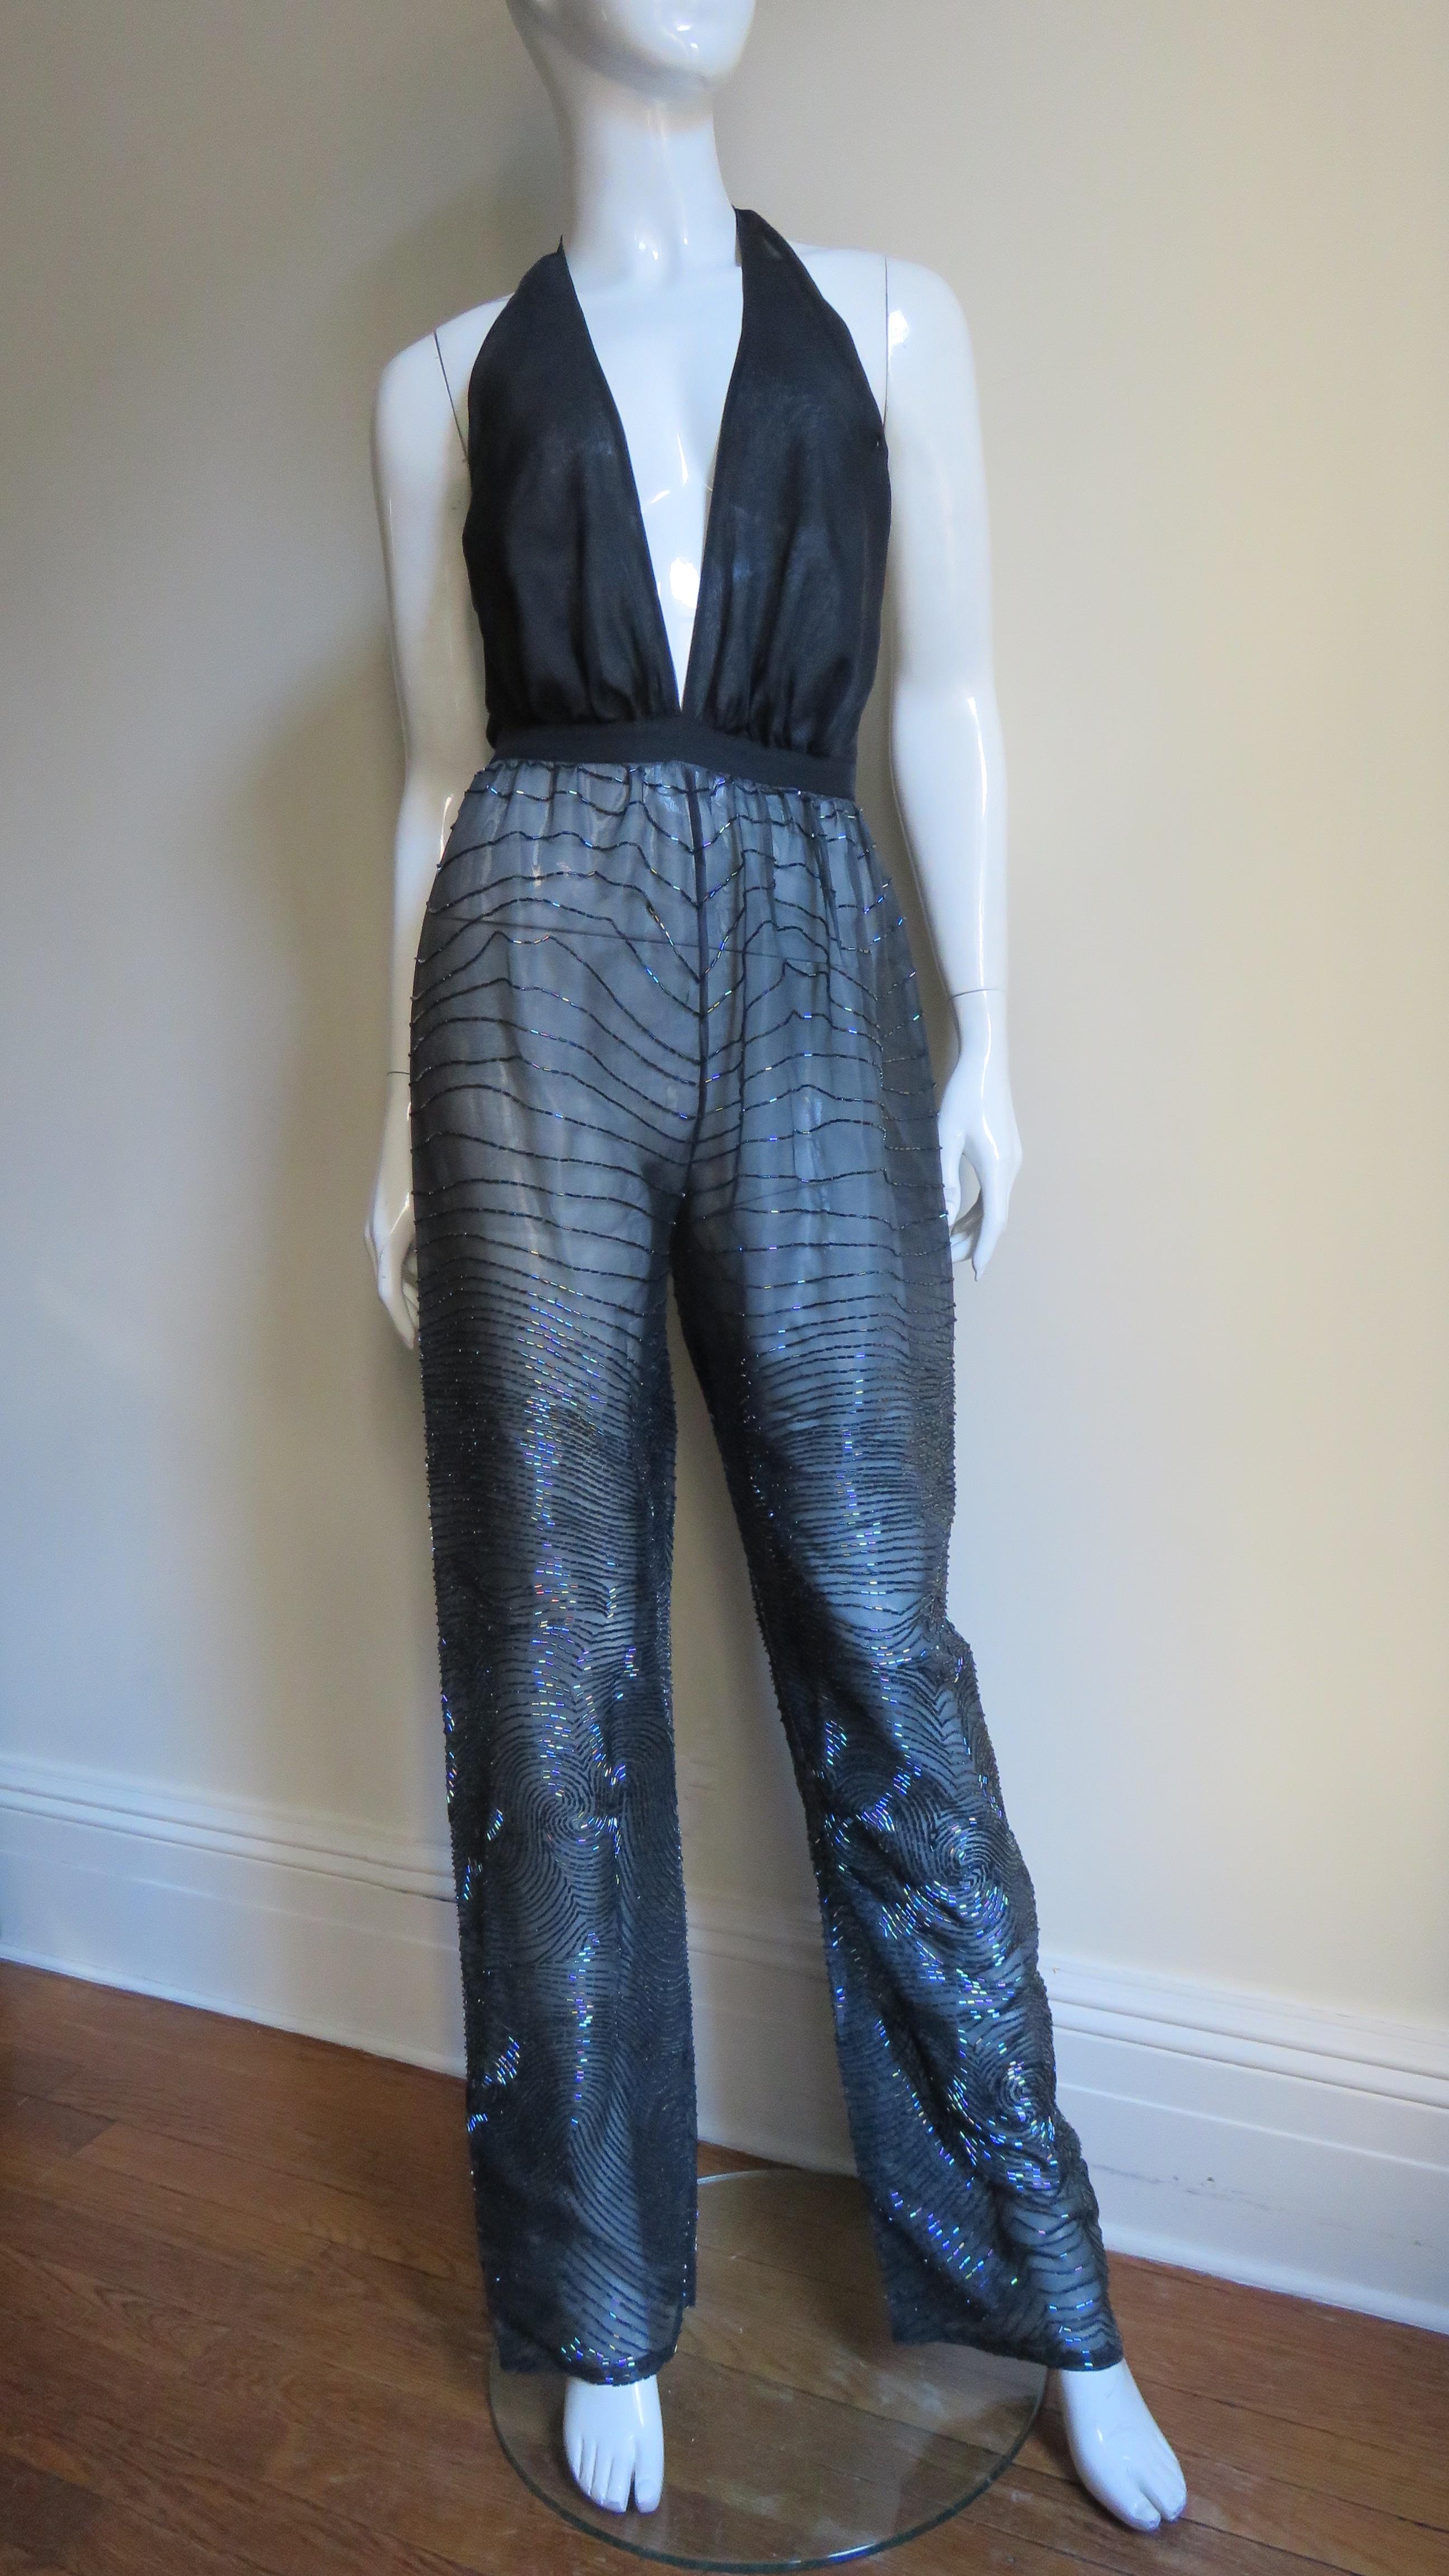 An incredible black silk 2 piece set from Halston covered in an intricately glass tubular bead swirl pattern. The set is comprised of a halter jumpsuit with a deep plunging black silk bodice and straight pant legs. It has a matching beautifully